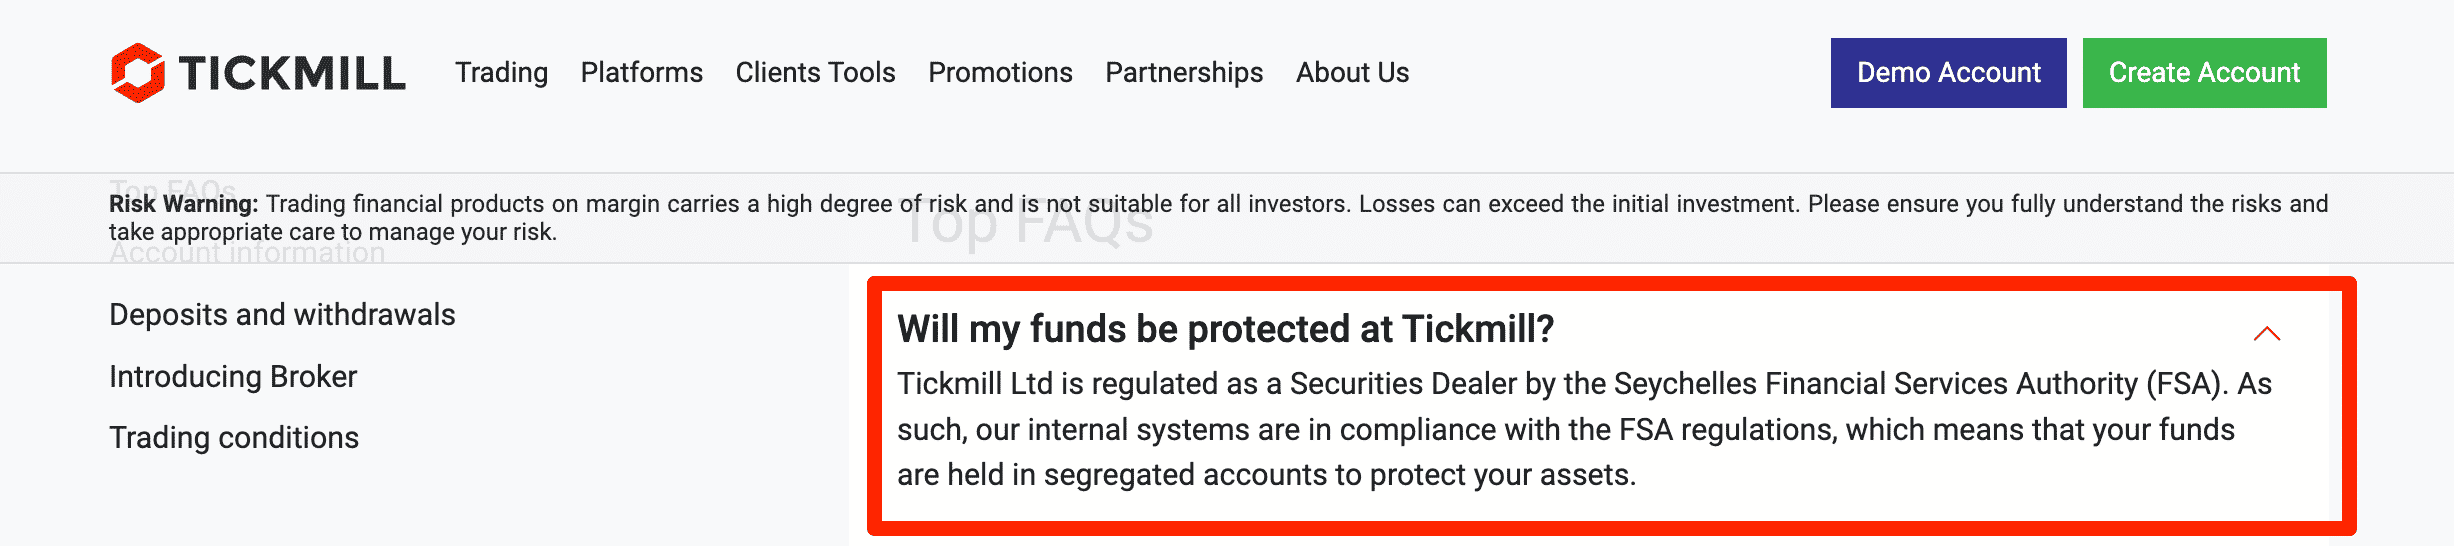 Tickmill Client Fund Security and Safety Features